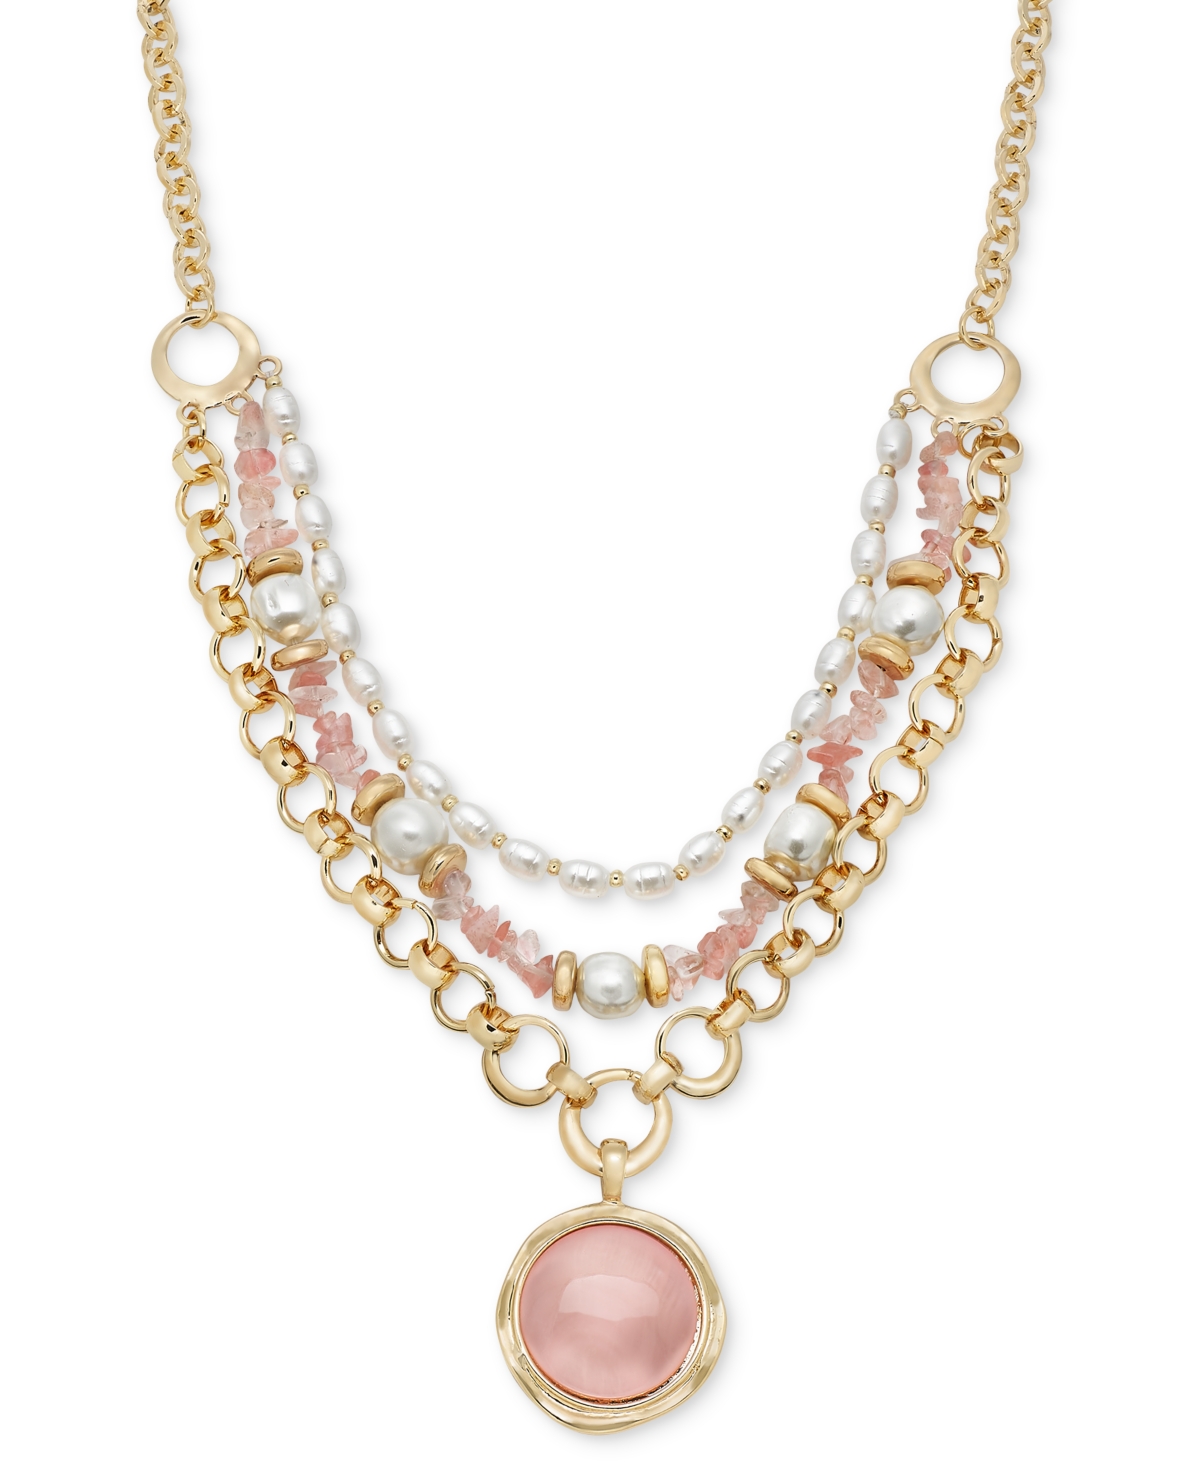 Gold-Tone Multi-Row Pendant Necklace, 17" + 3" extender, Created for Macy's - Pink